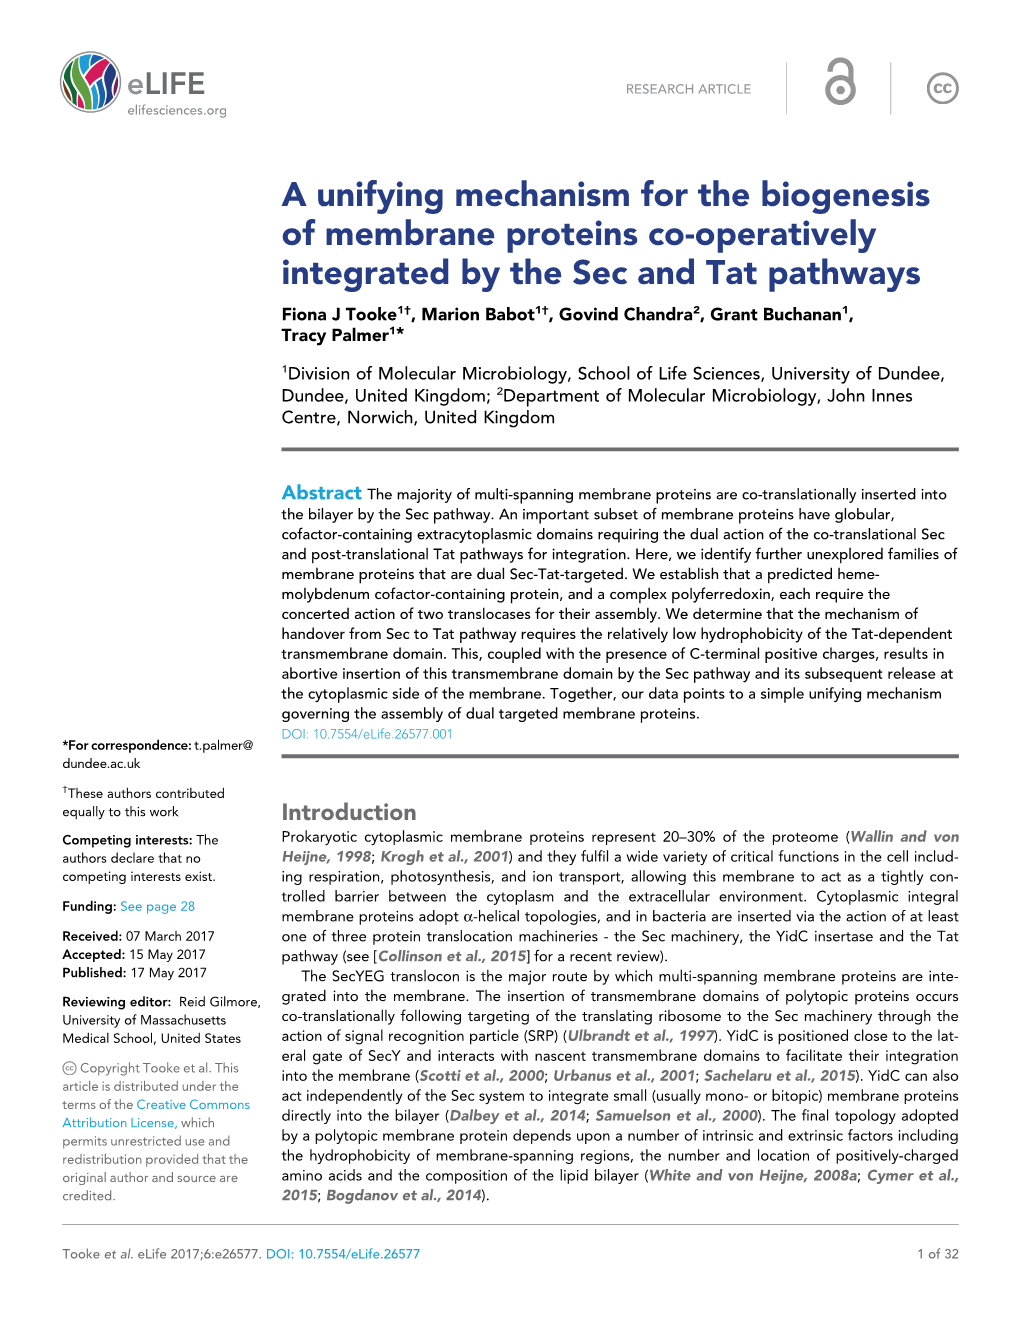 A Unifying Mechanism for the Biogenesis of Membrane Proteins